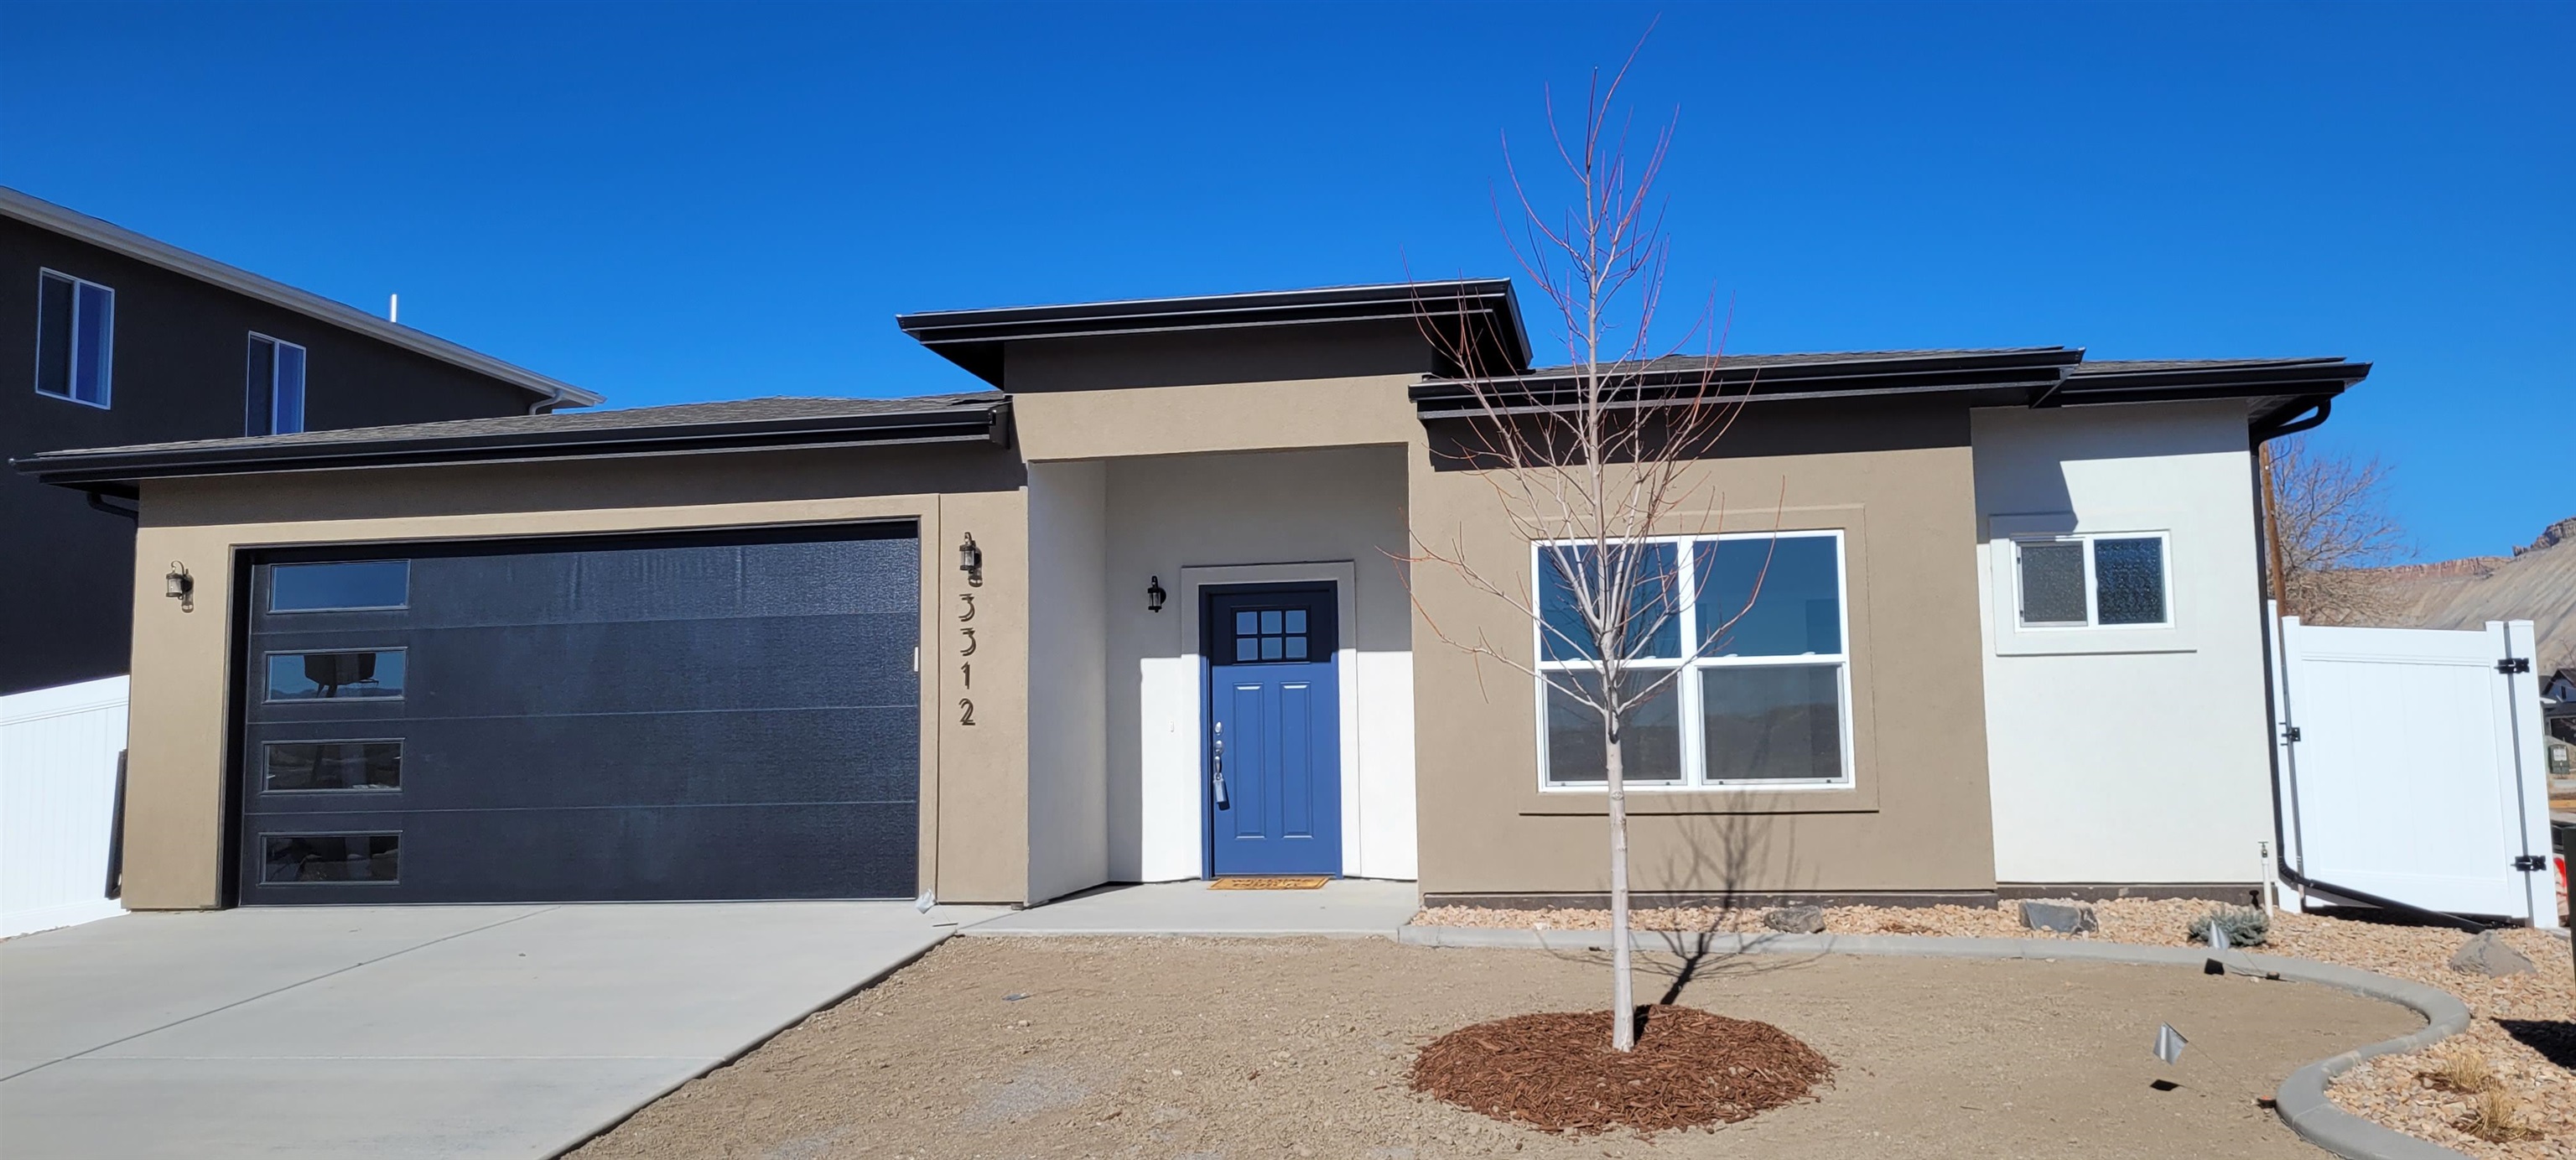 Use Our Builder Advantage program can help you get 1% in closing costs through sellers preferred lender. OR CRA FINANCING TO POTENTIALLY SAVE HUNDREDS OF $$ / MO ON PAYMENTS (CALL FOR DETAILS). PICK LOT & FLOORPLAN OR GO CUSTOM IN VISTA MESA!! AMAZING Grand Mesa views from this new neighborhood just south east of 33 & E Roads! 3/4 Mile to the Riverfront Trail & 1/2 mile to the new Mesa Co Community Campus library, early childhood ed center & more. INCLUDES LANDSCAPING & FENCING. Single level split floor plan, 3 bedroom, 3 baths, 1741 square feet,  great room area for gatherings, bedrooms 2 & 3 share a "Jack & Jill" bathroom and 2 car garage.